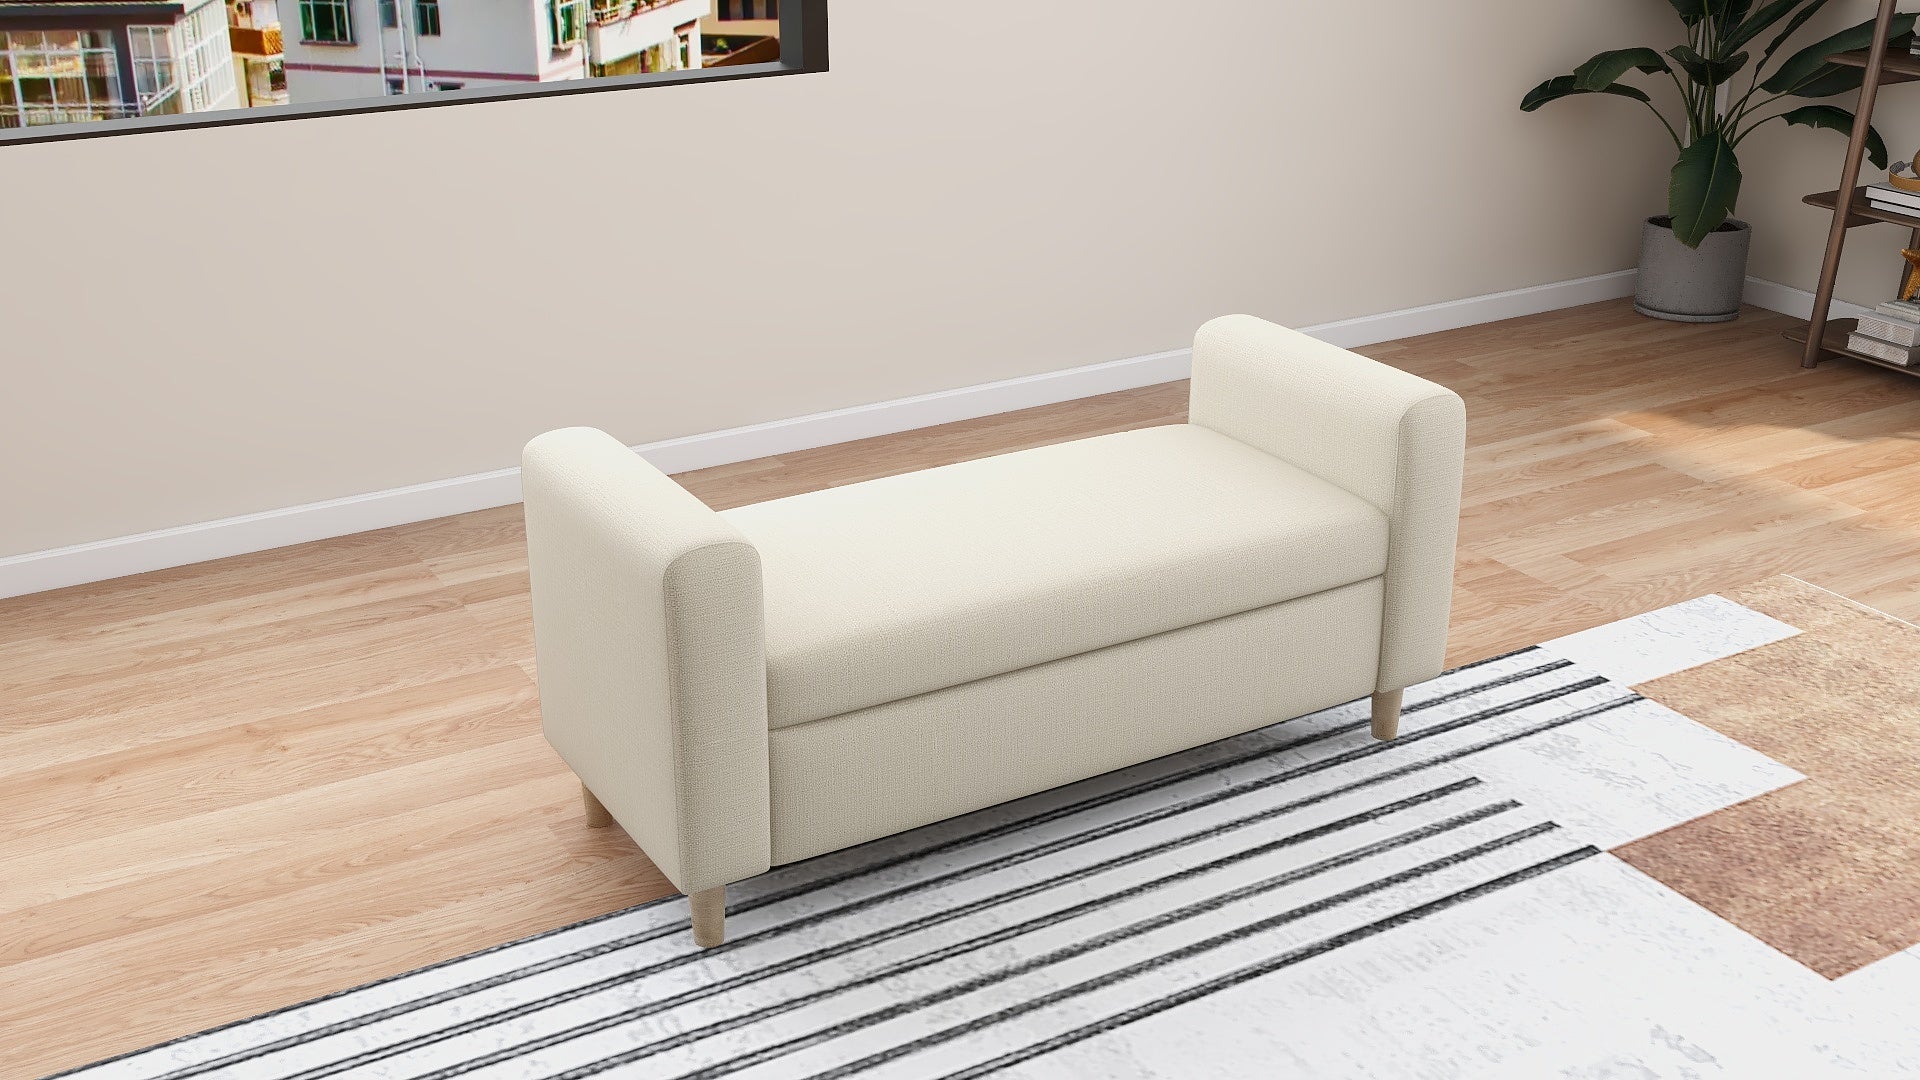 BLANT Fabric Bench AF Home